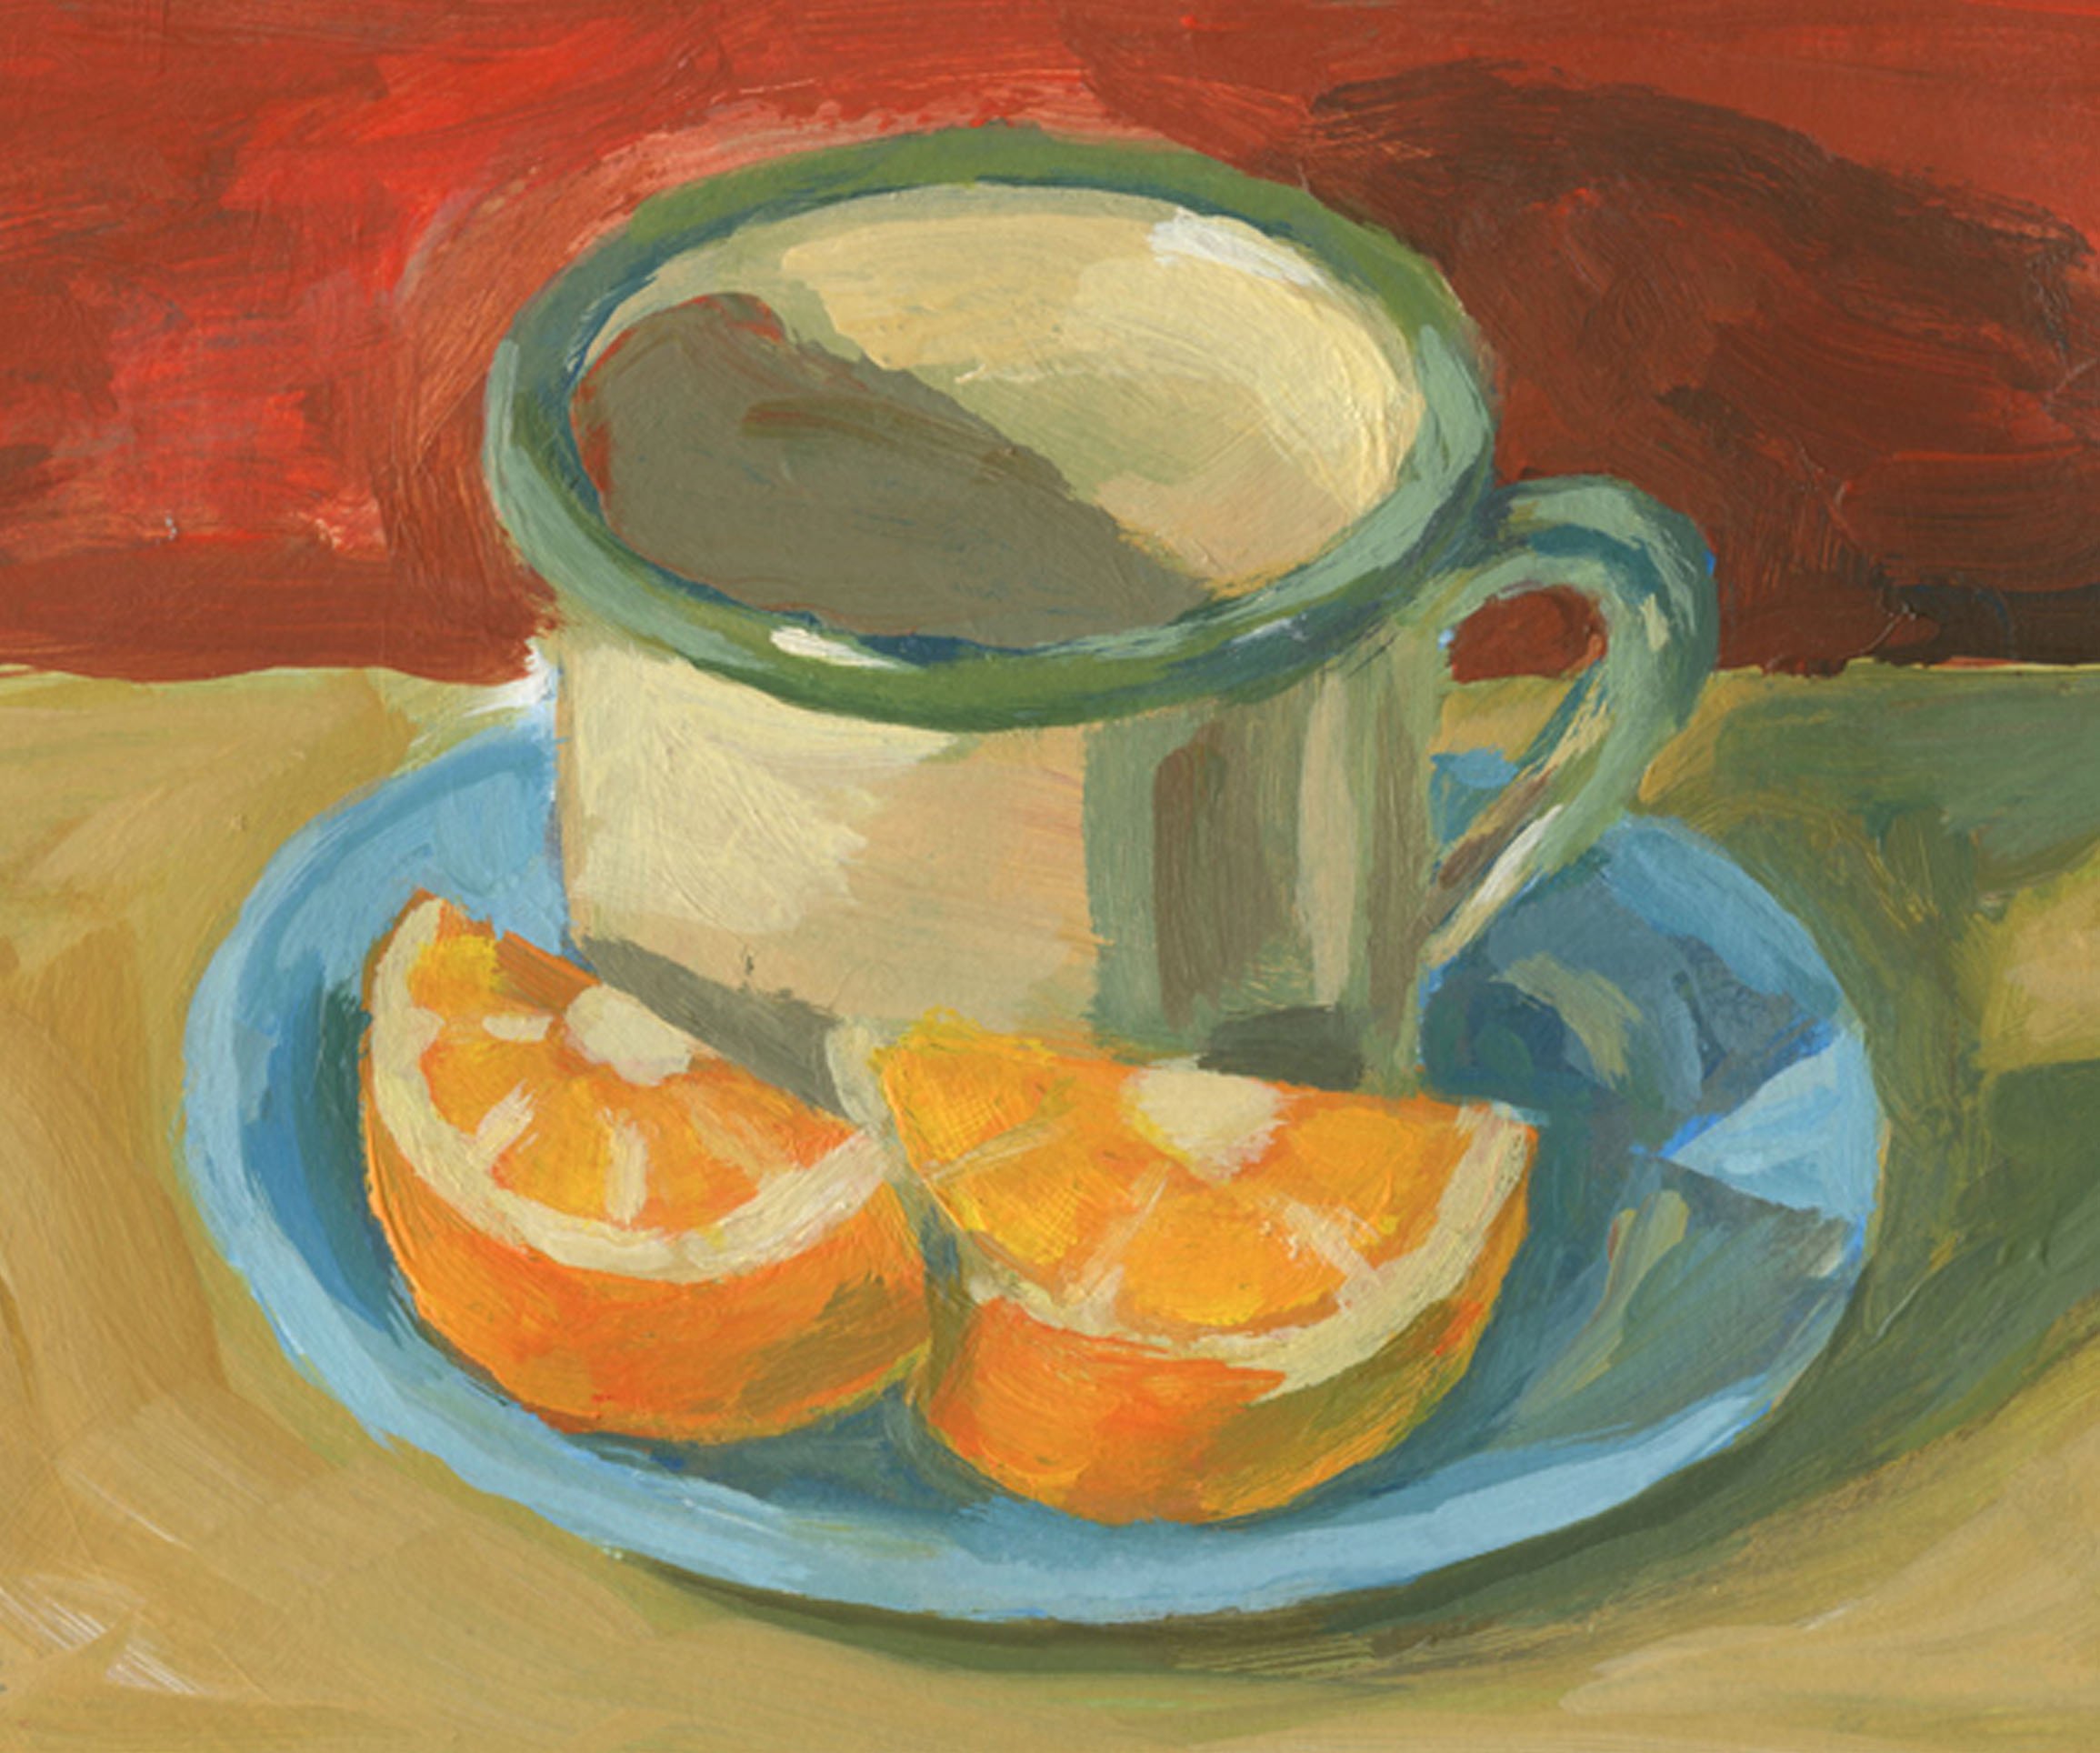 Enamel Cup with Orange Slices by Jessica Vaughan